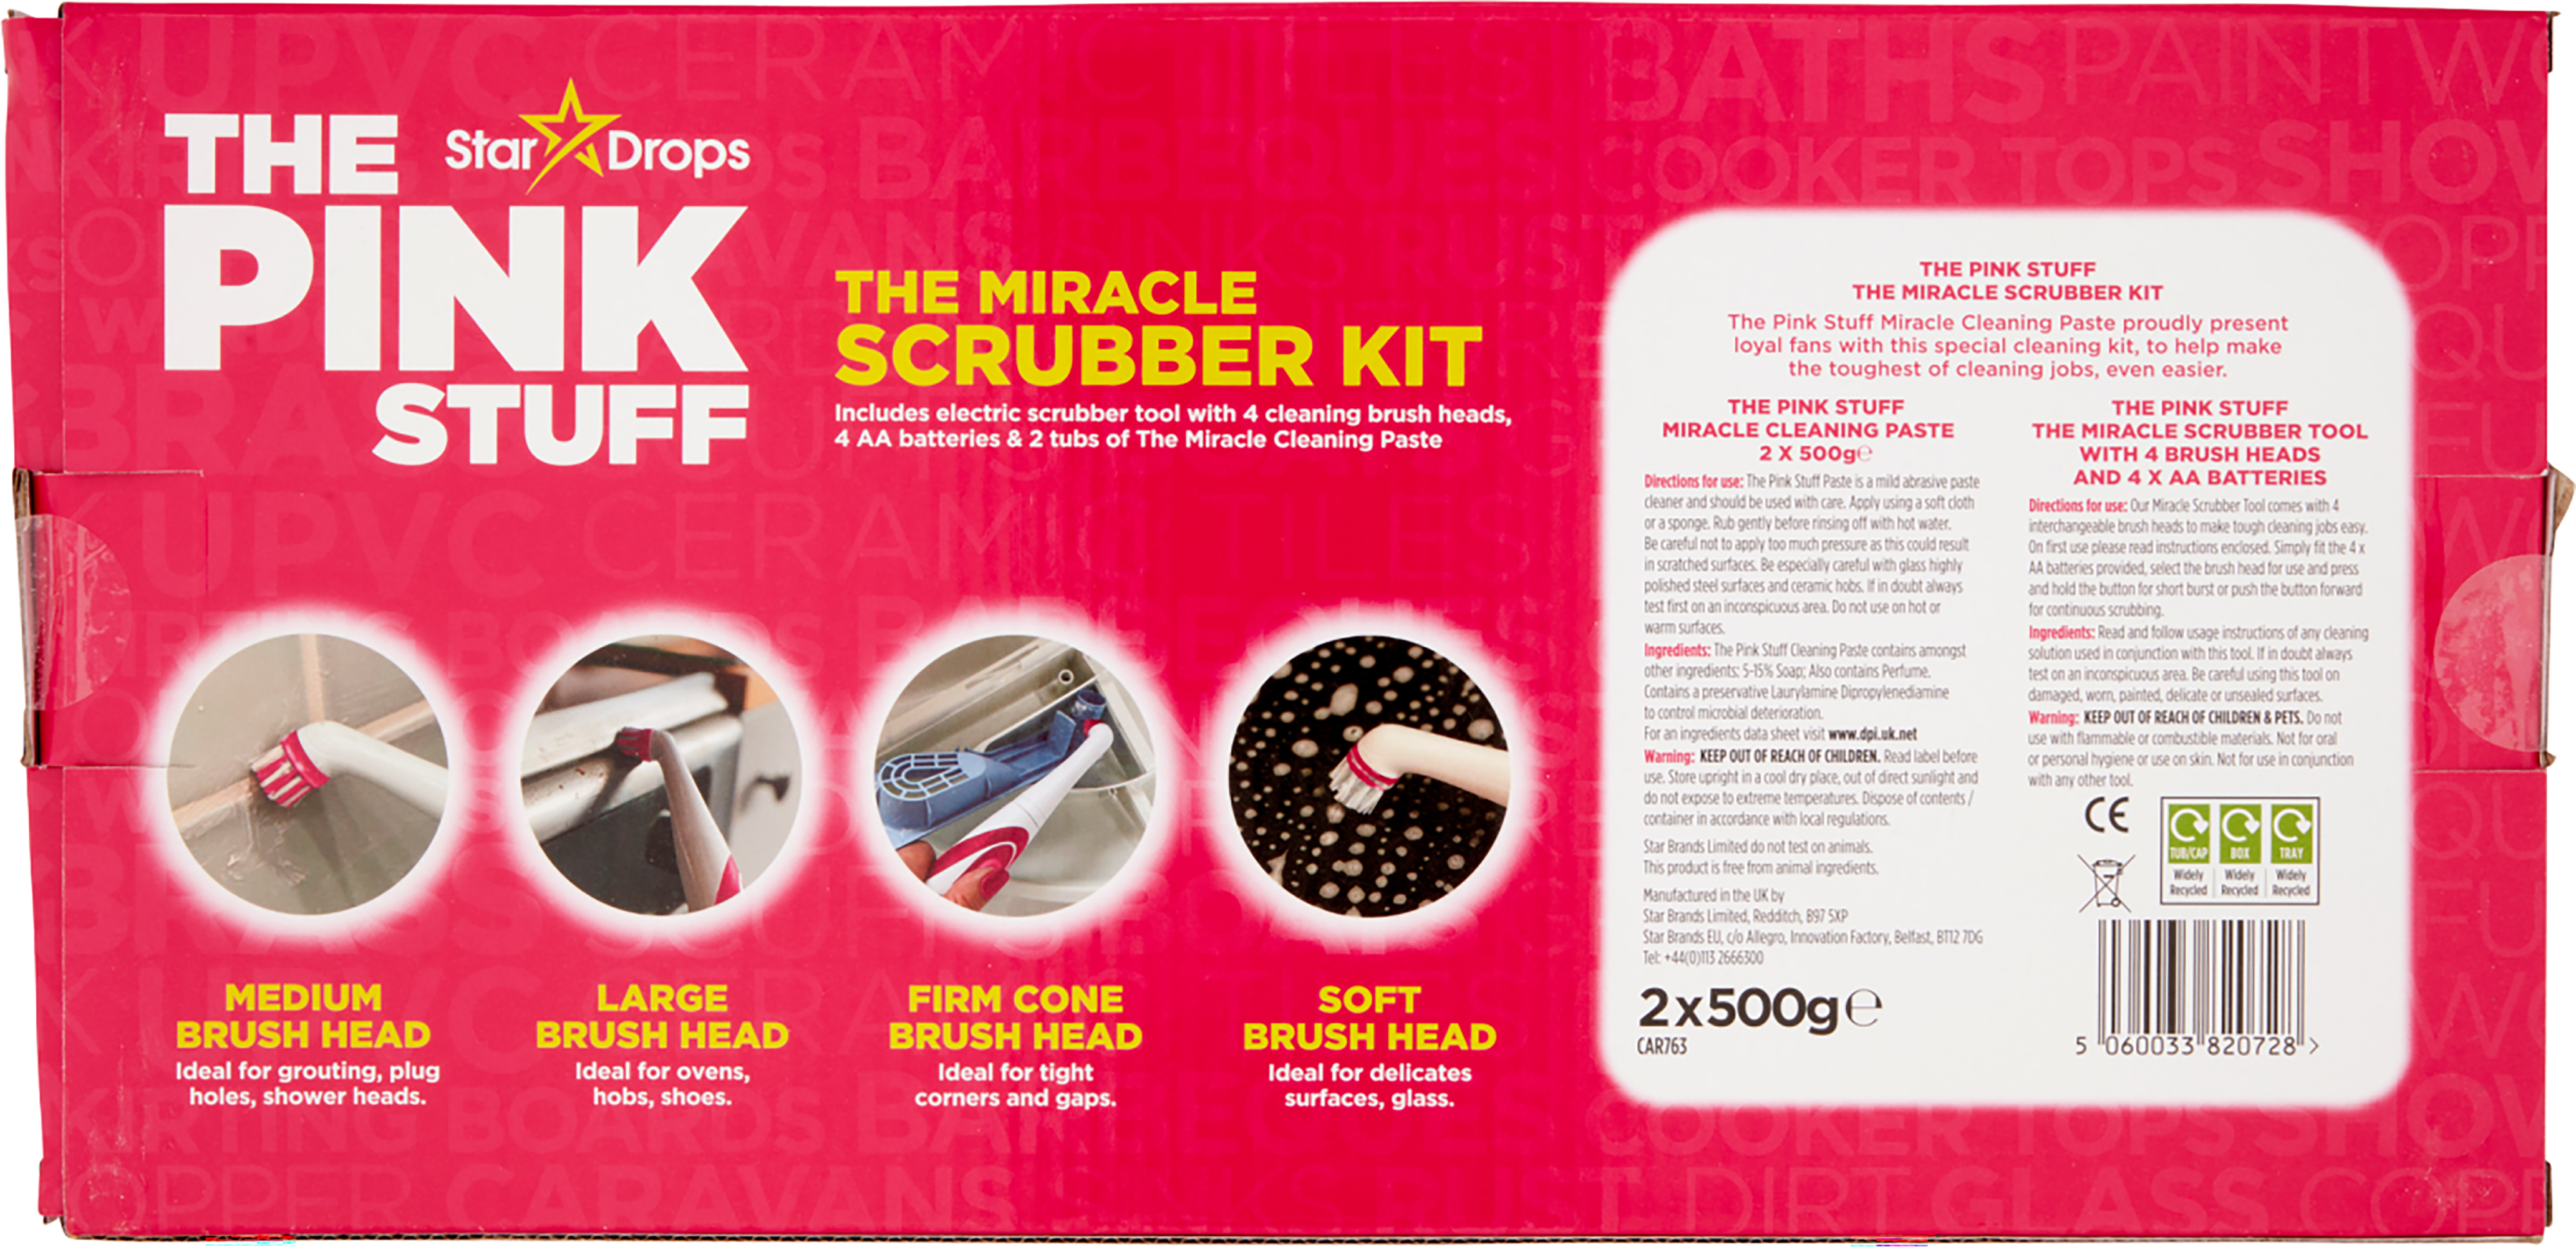 https://lyko.com/globalassets/product-images/the-pink-stuff-the-miracle-scrubber-kit-3278-115-0000_2.jpg?ref=CD40D331F5